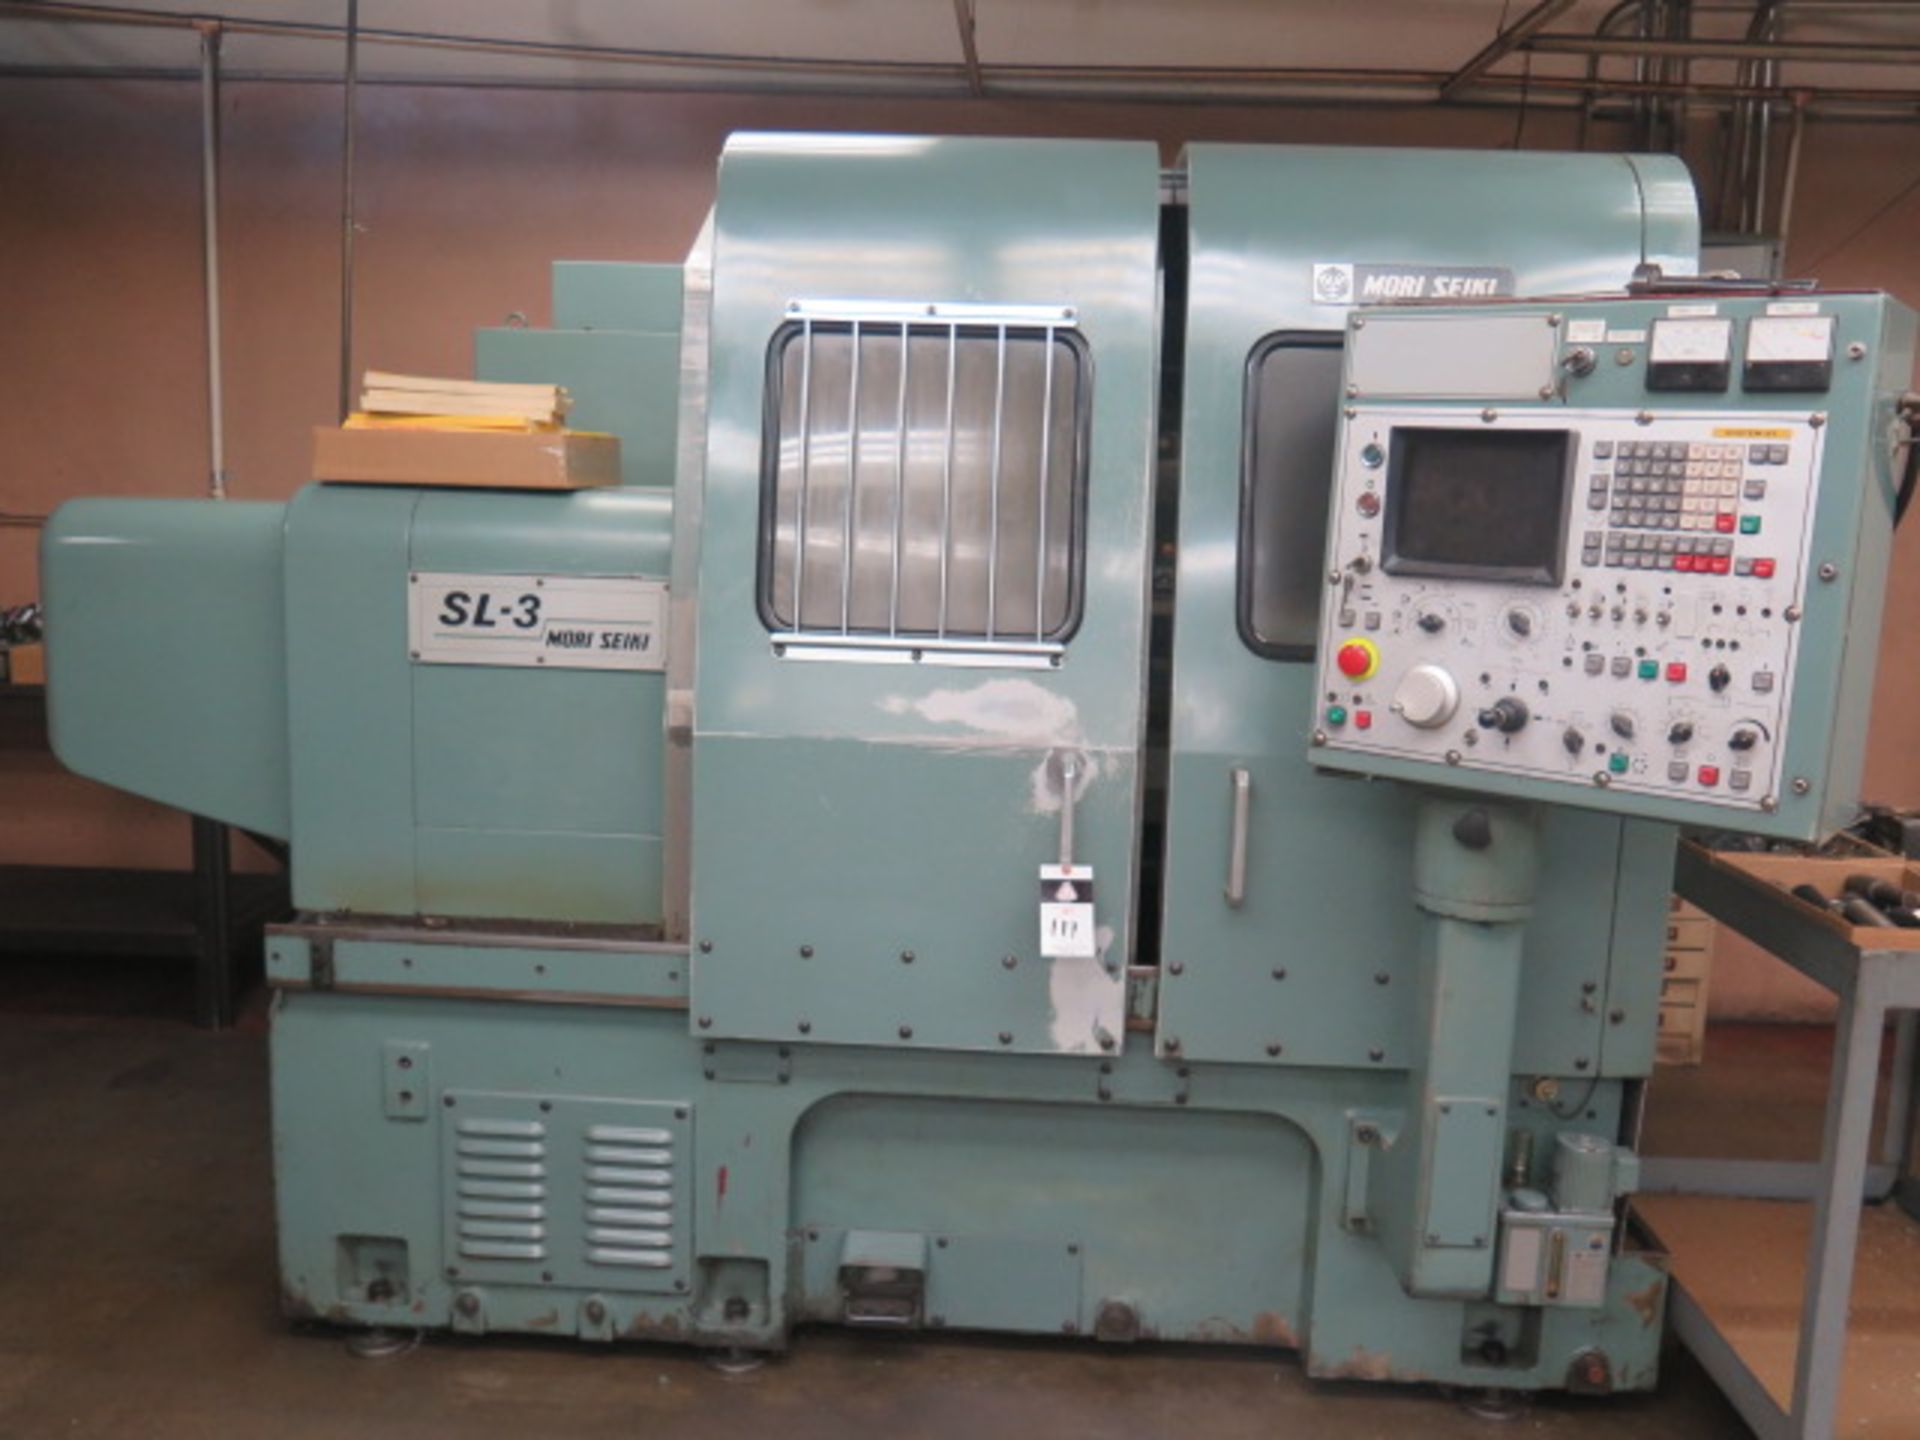 Mori Seiki SL-3A CNC Turning Center s/n 3141 w/ Fanuc 6T Controls, 12-Station Turret, SOLD AS IS